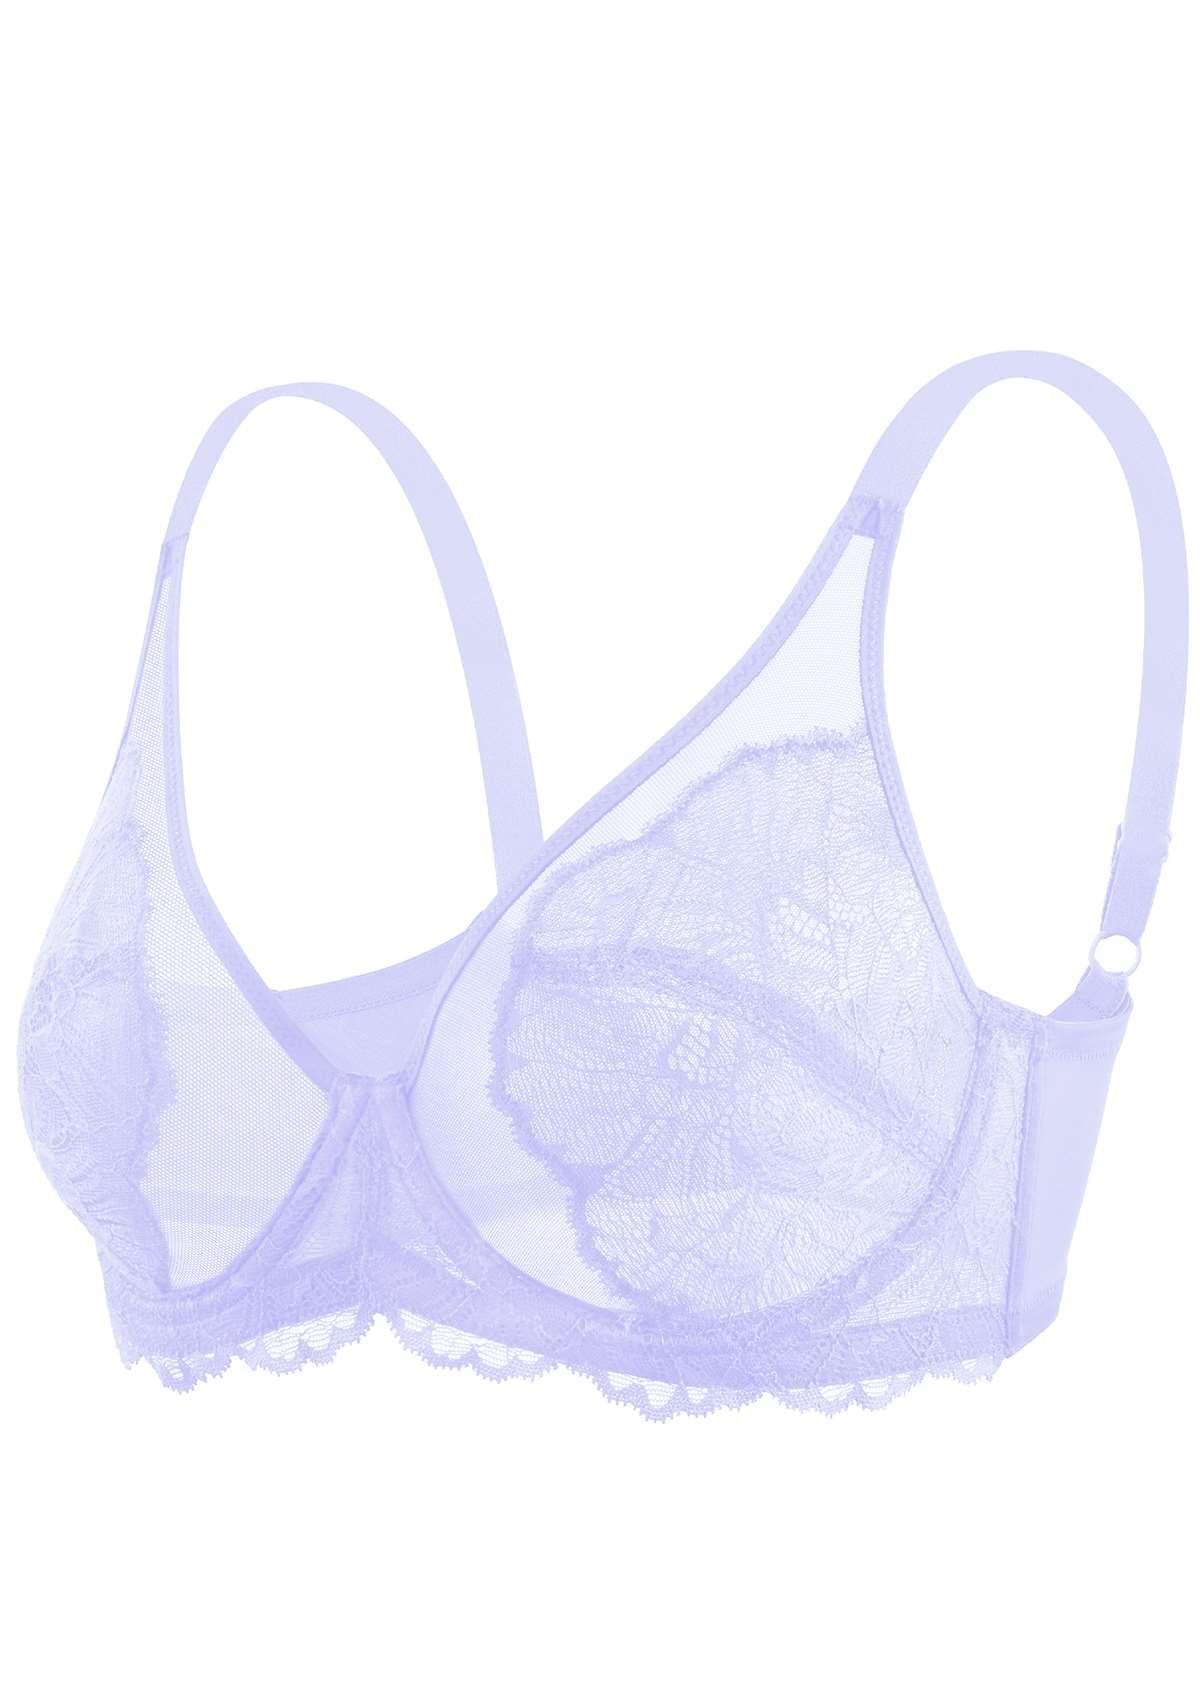 HSIA Blossom Transparent Lace Bra: Plus Size Wired Back Smoothing Bra - Light Purple / 34 / C